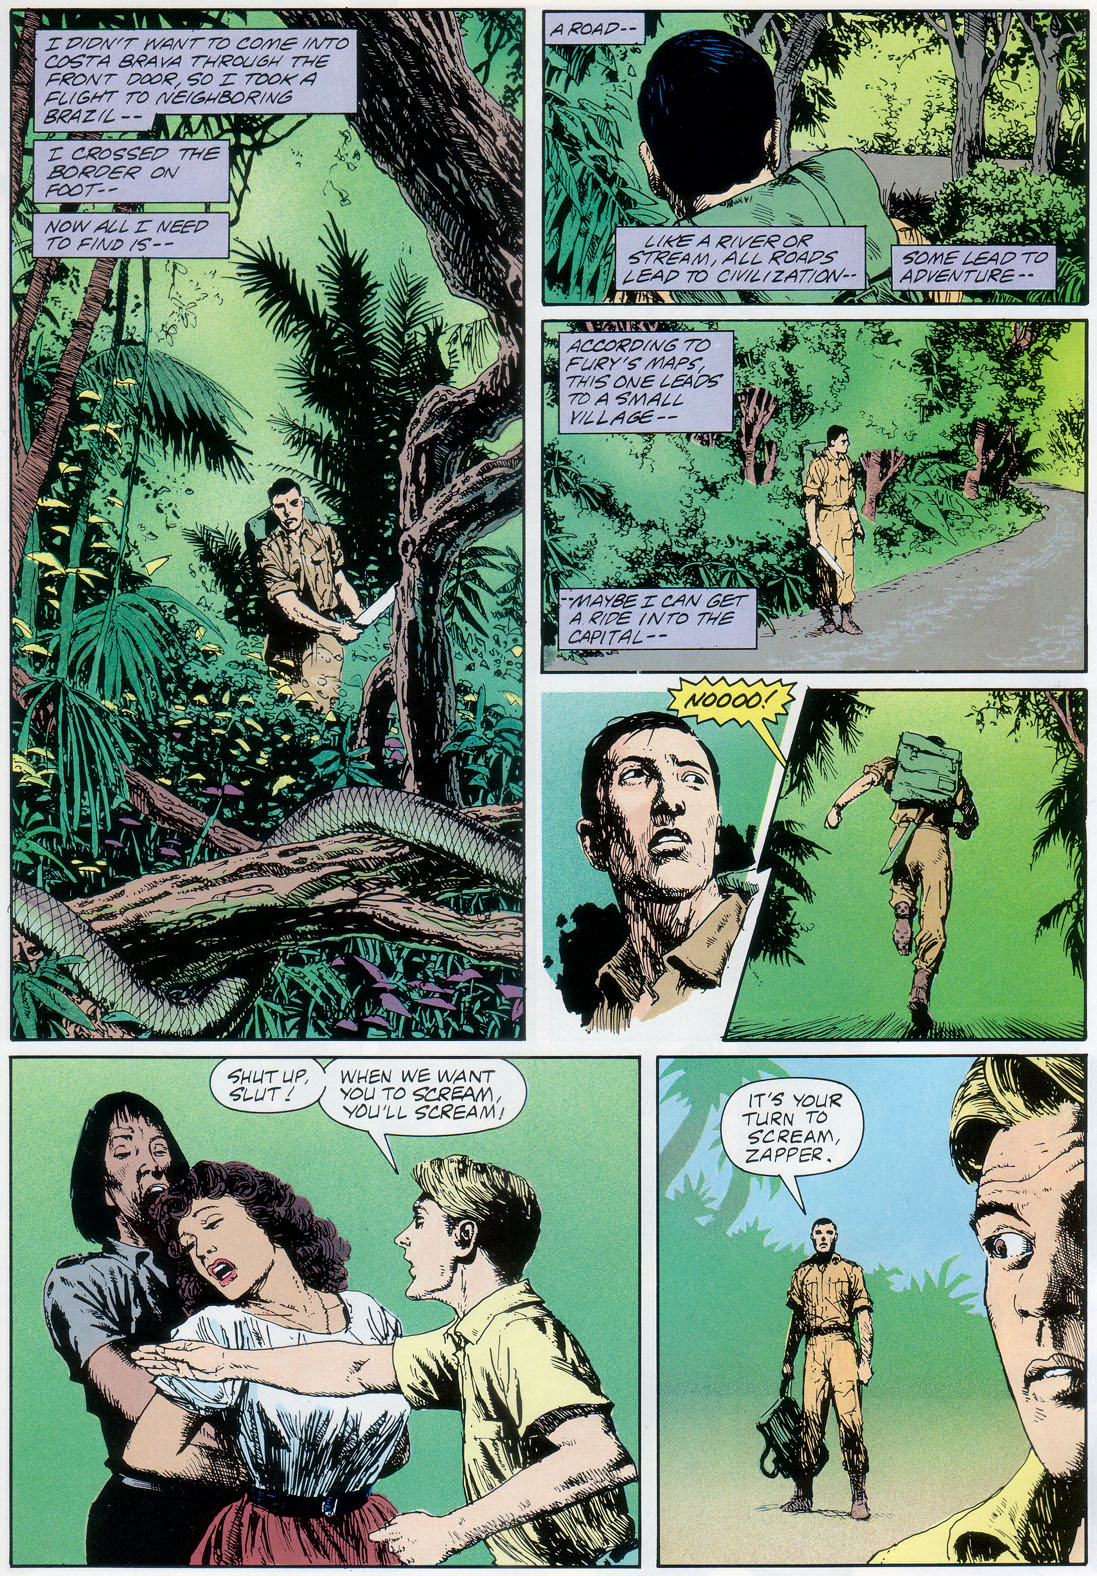 Marvel Graphic Novel issue 57 - Rick Mason - The Agent - Page 37